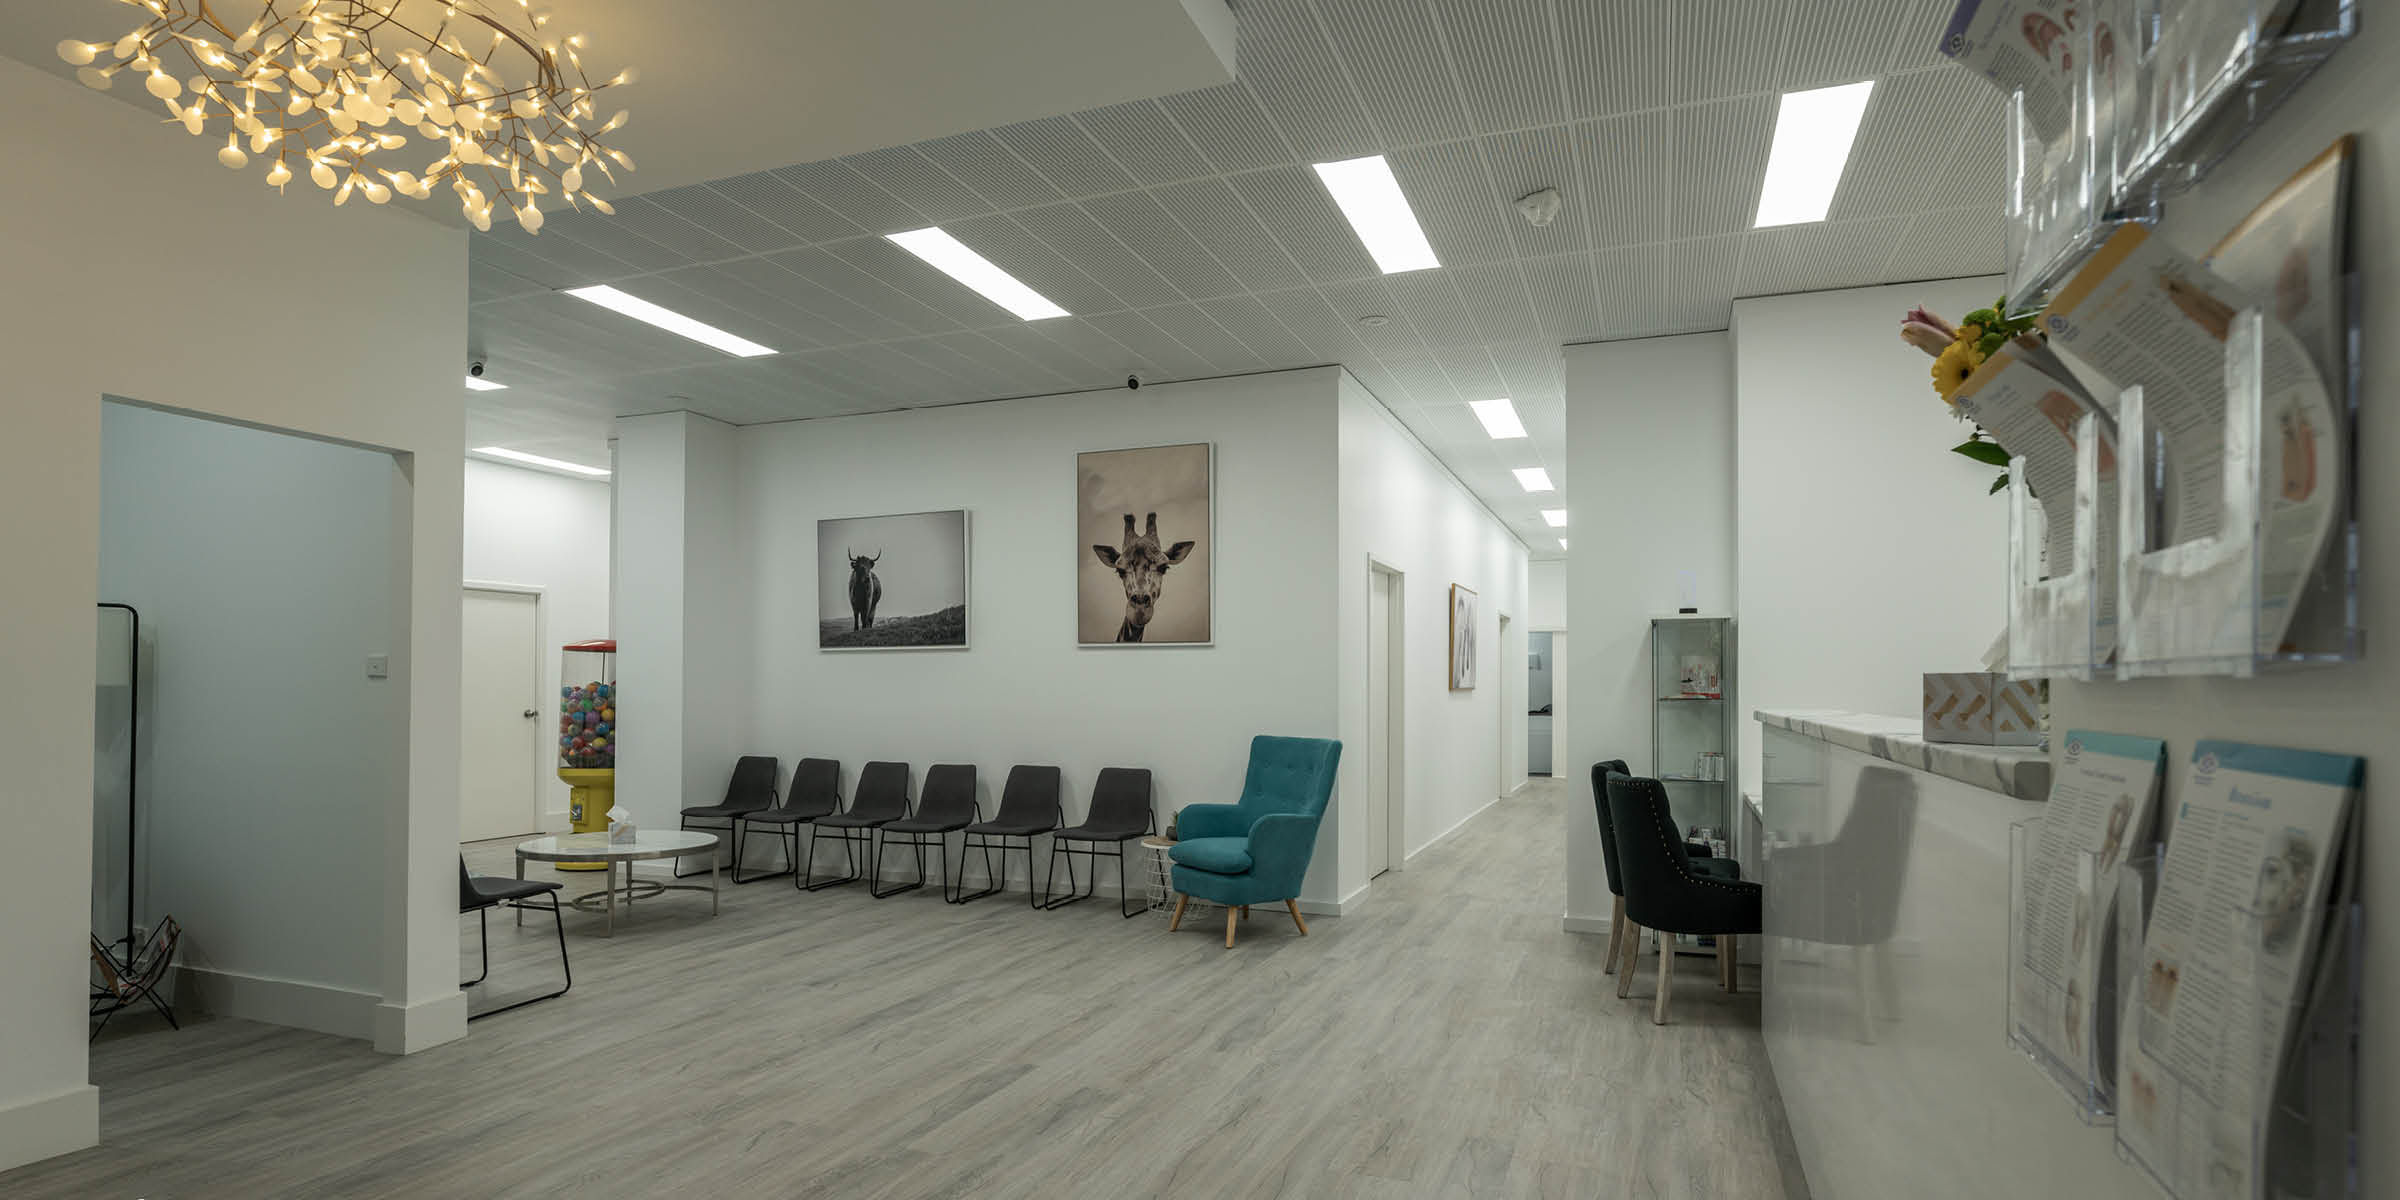 Restoration of Historic Building & Dental Clinic Fitout